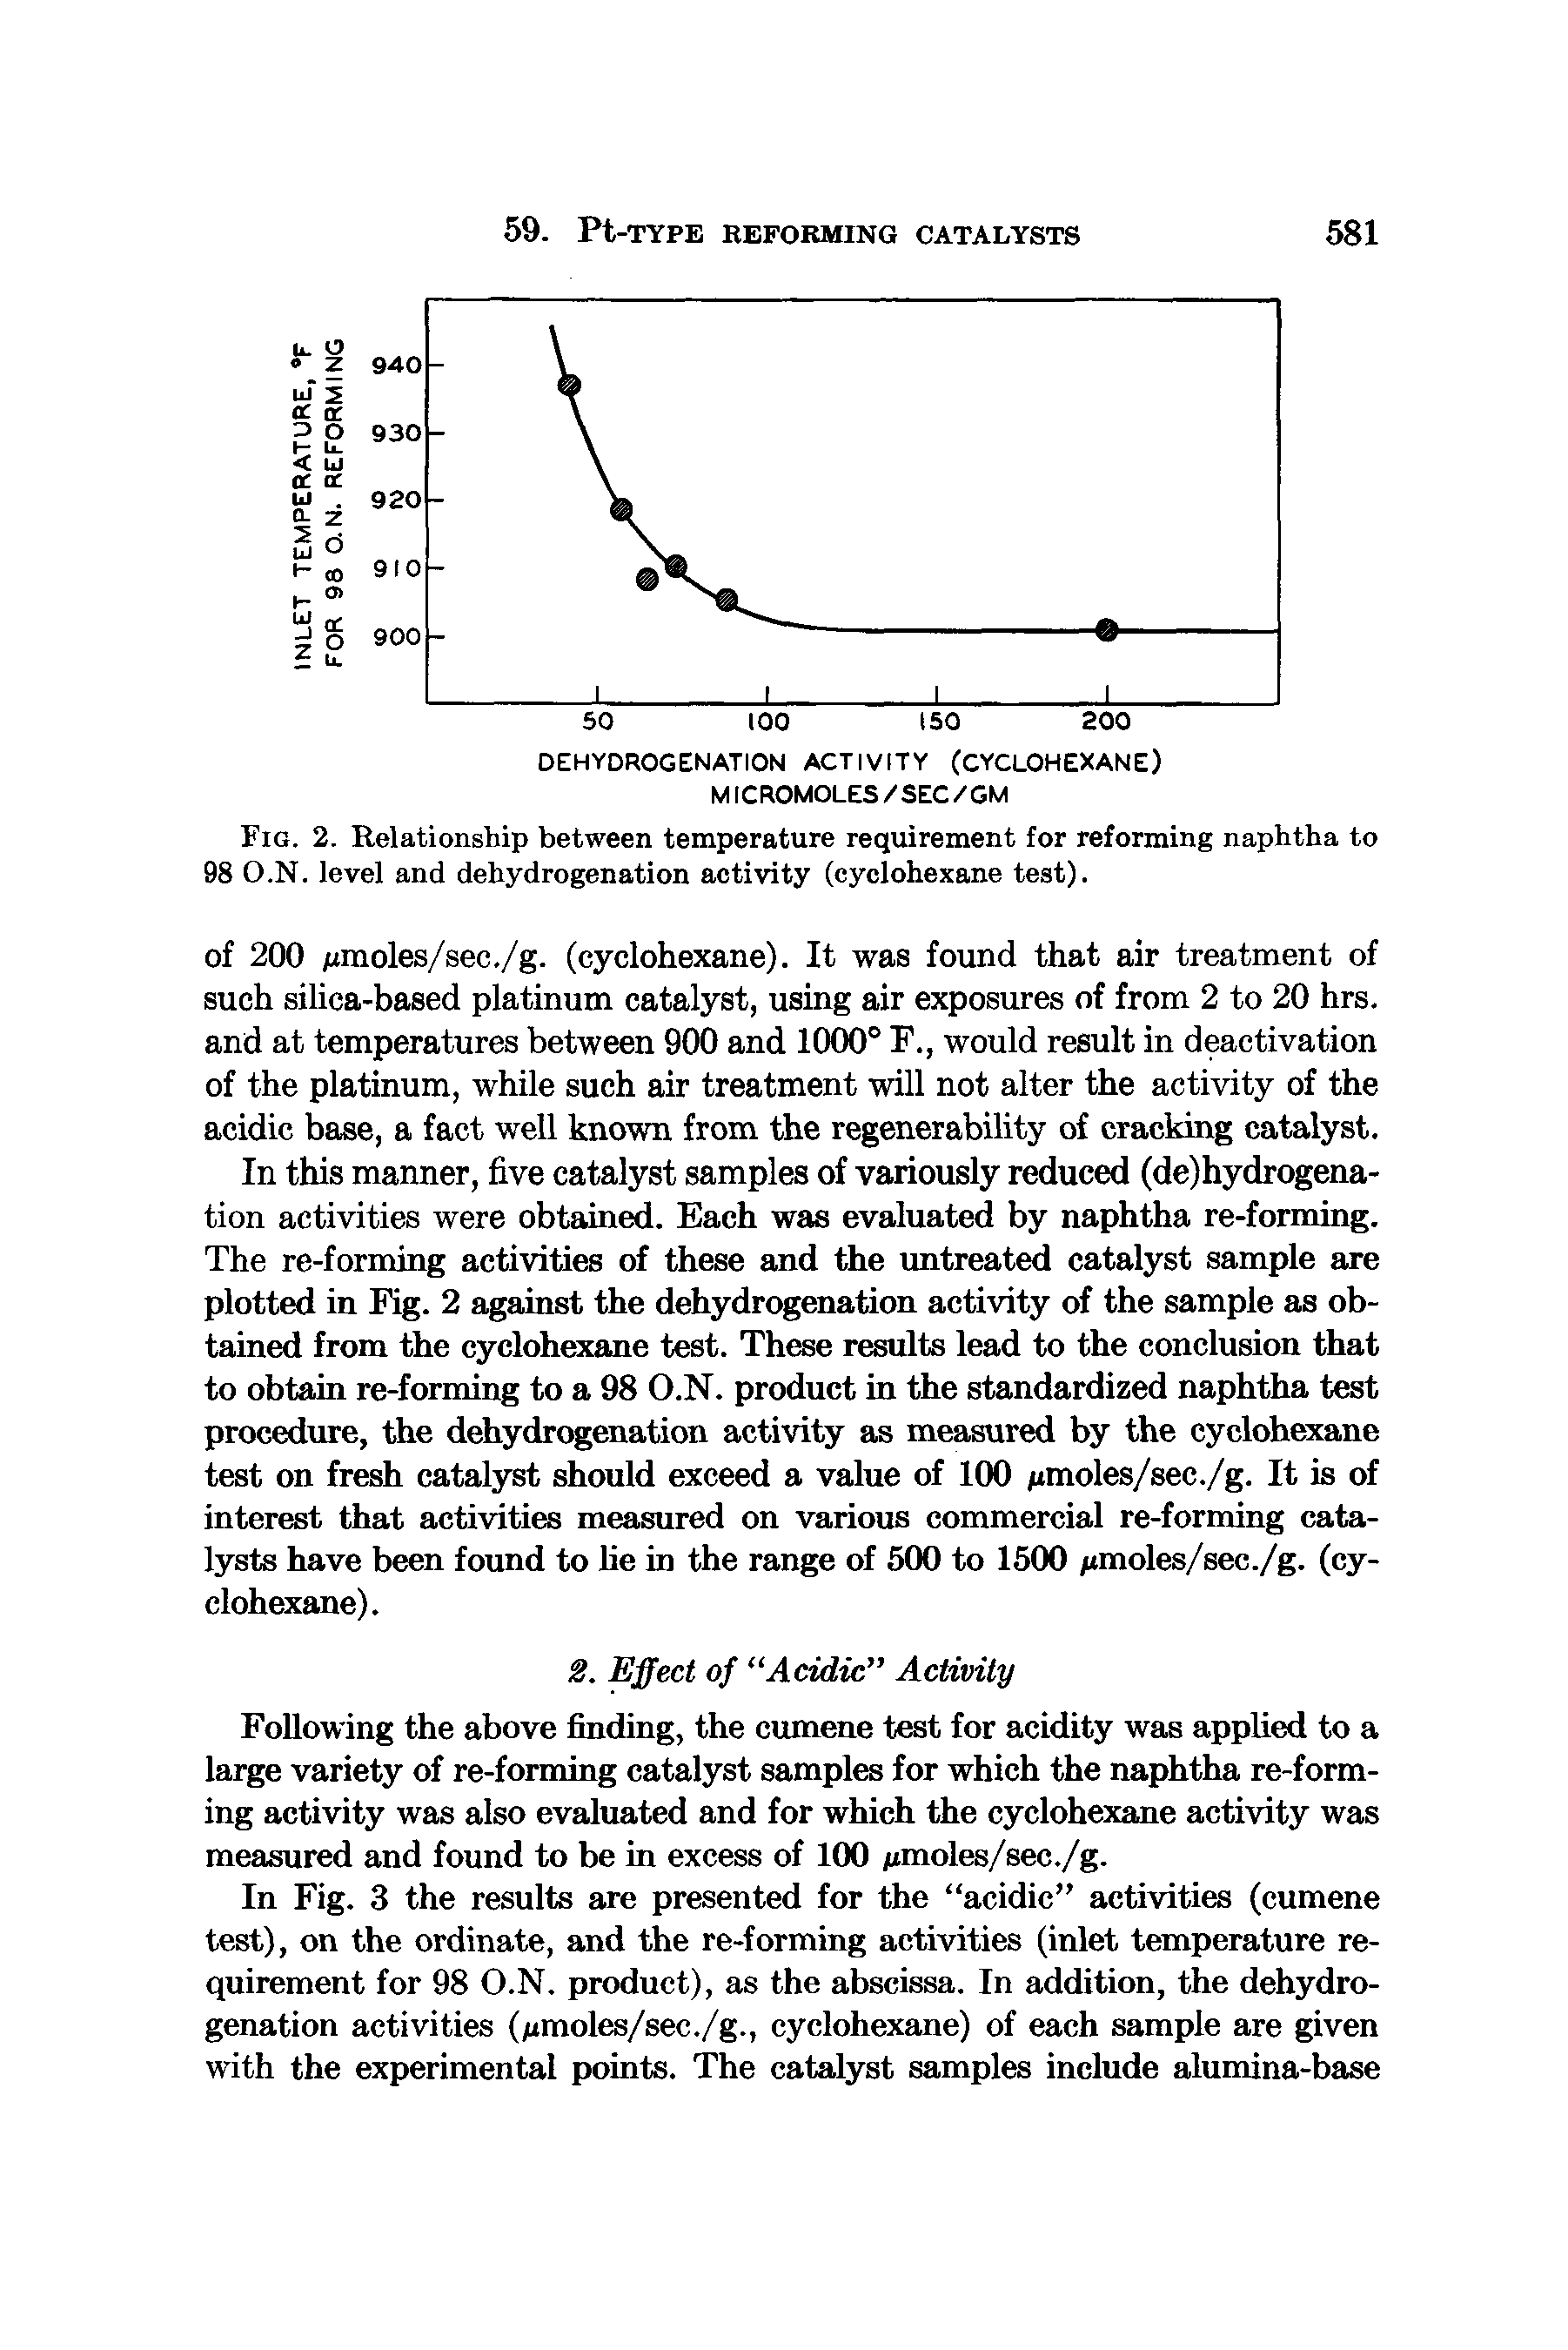 Fig. 2. Relationship between temperature requirement for reforming naphtha to 98 O.N. level and dehydrogenation activity (cyclohexane test).